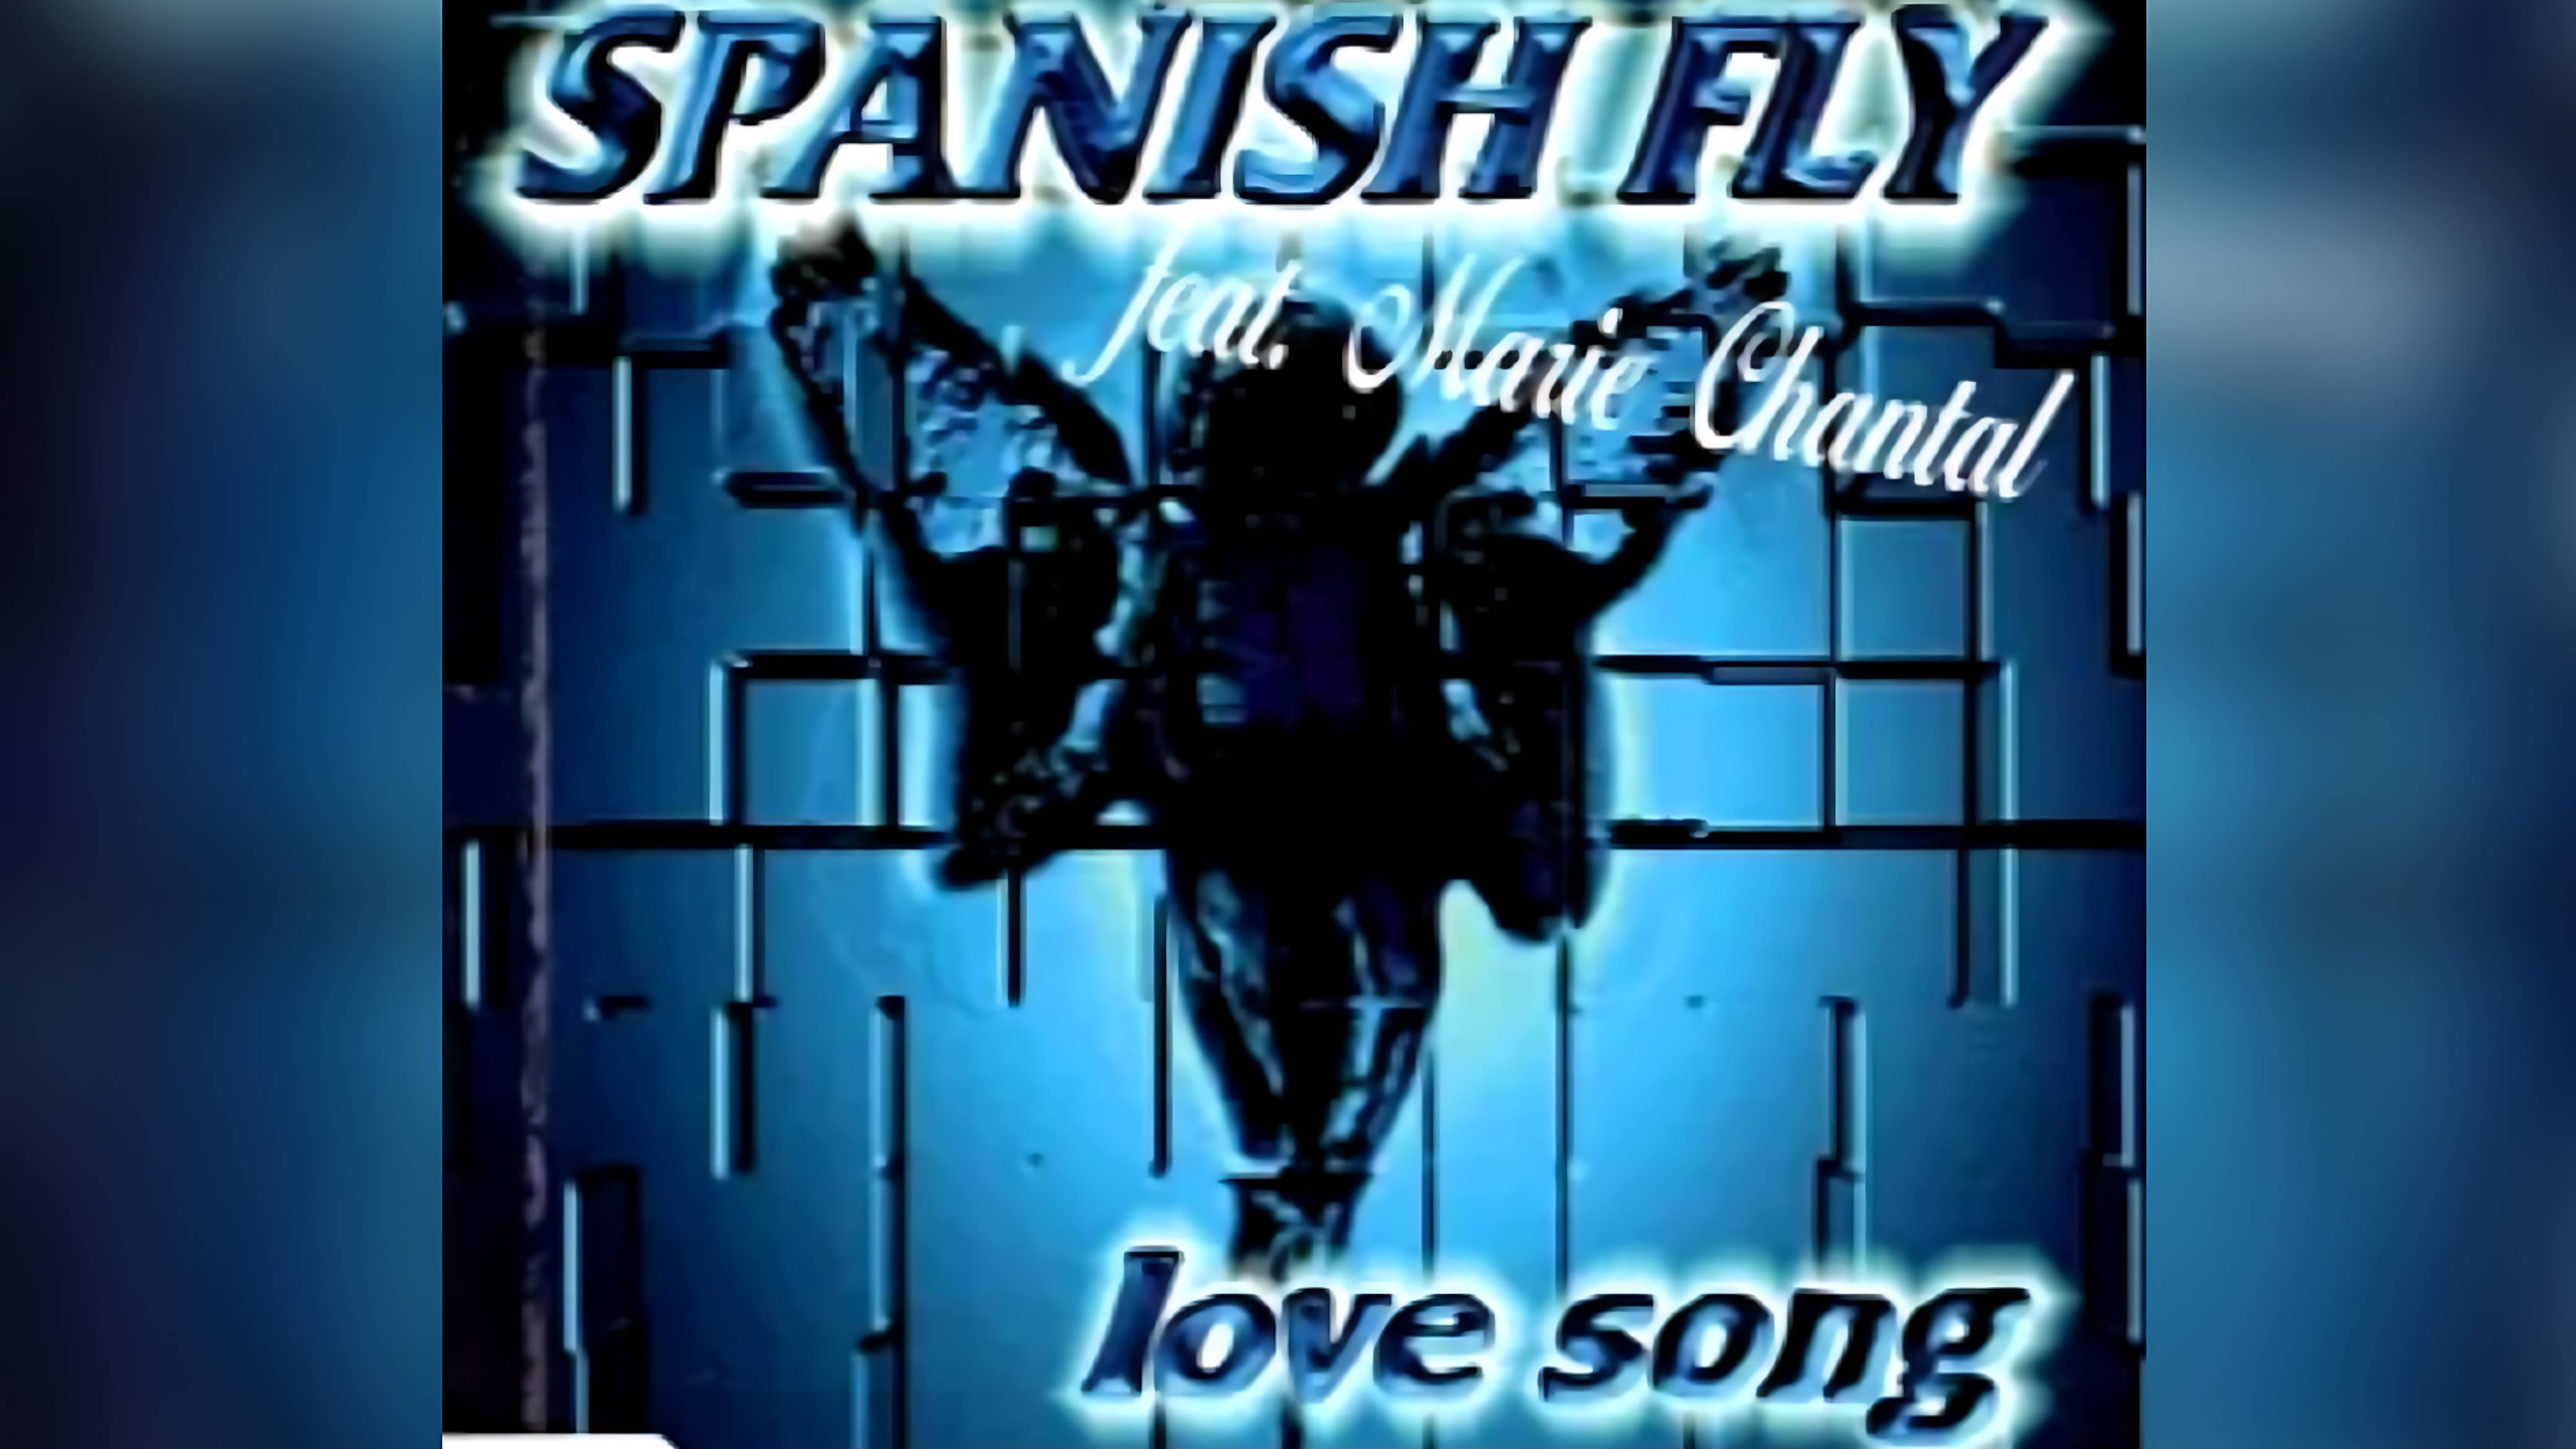 Spanish Fly Feat. Marie Chantal - Love Song - 1997